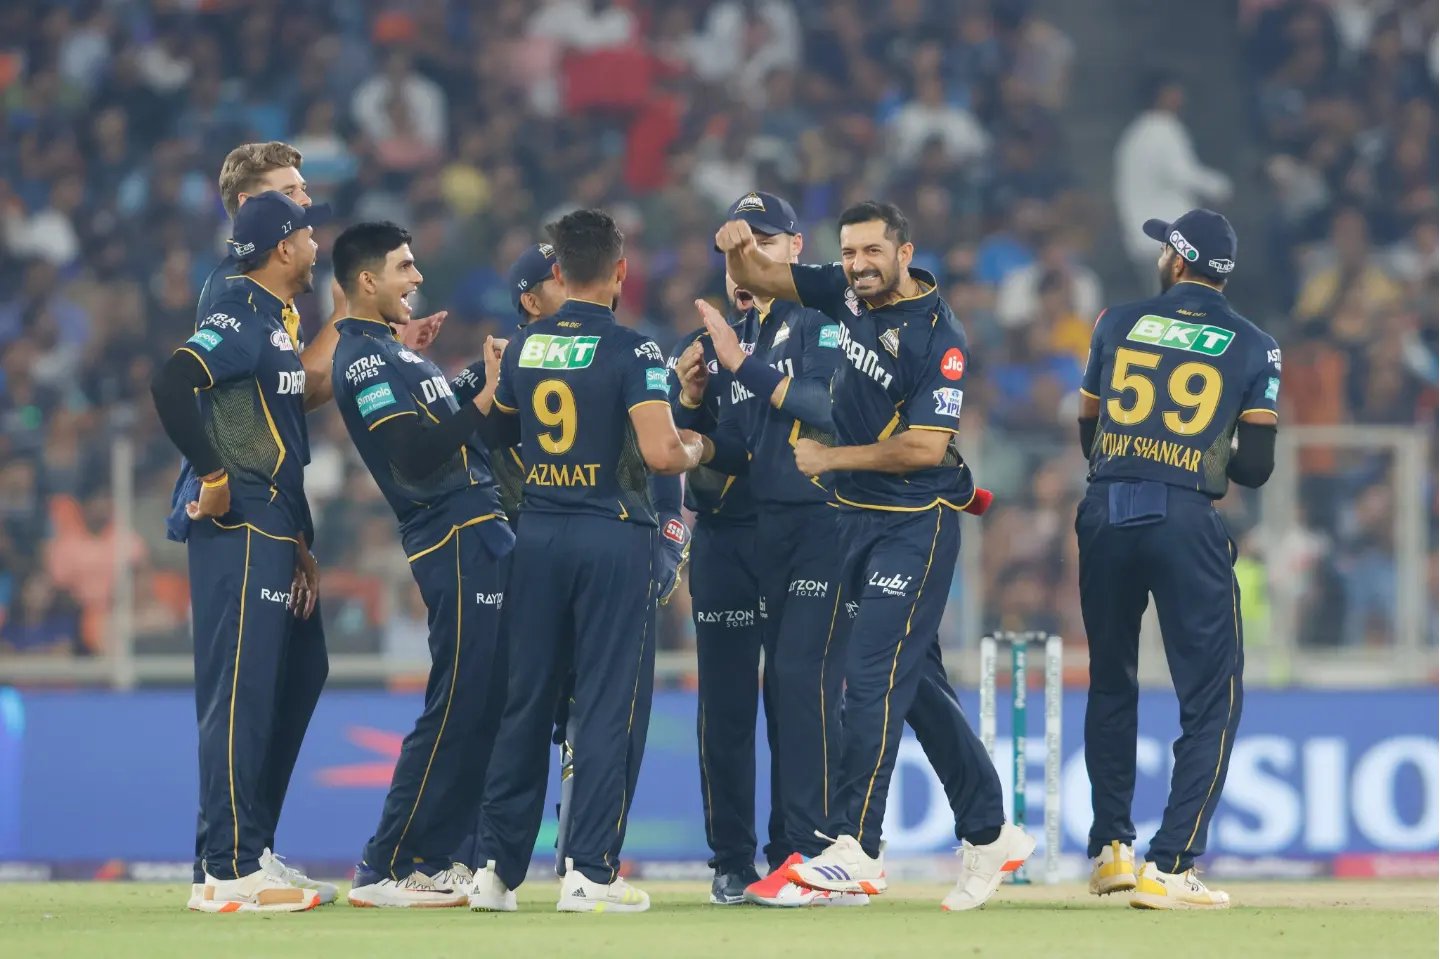 Gujarat Titans secure a thrilling win (Image: X)